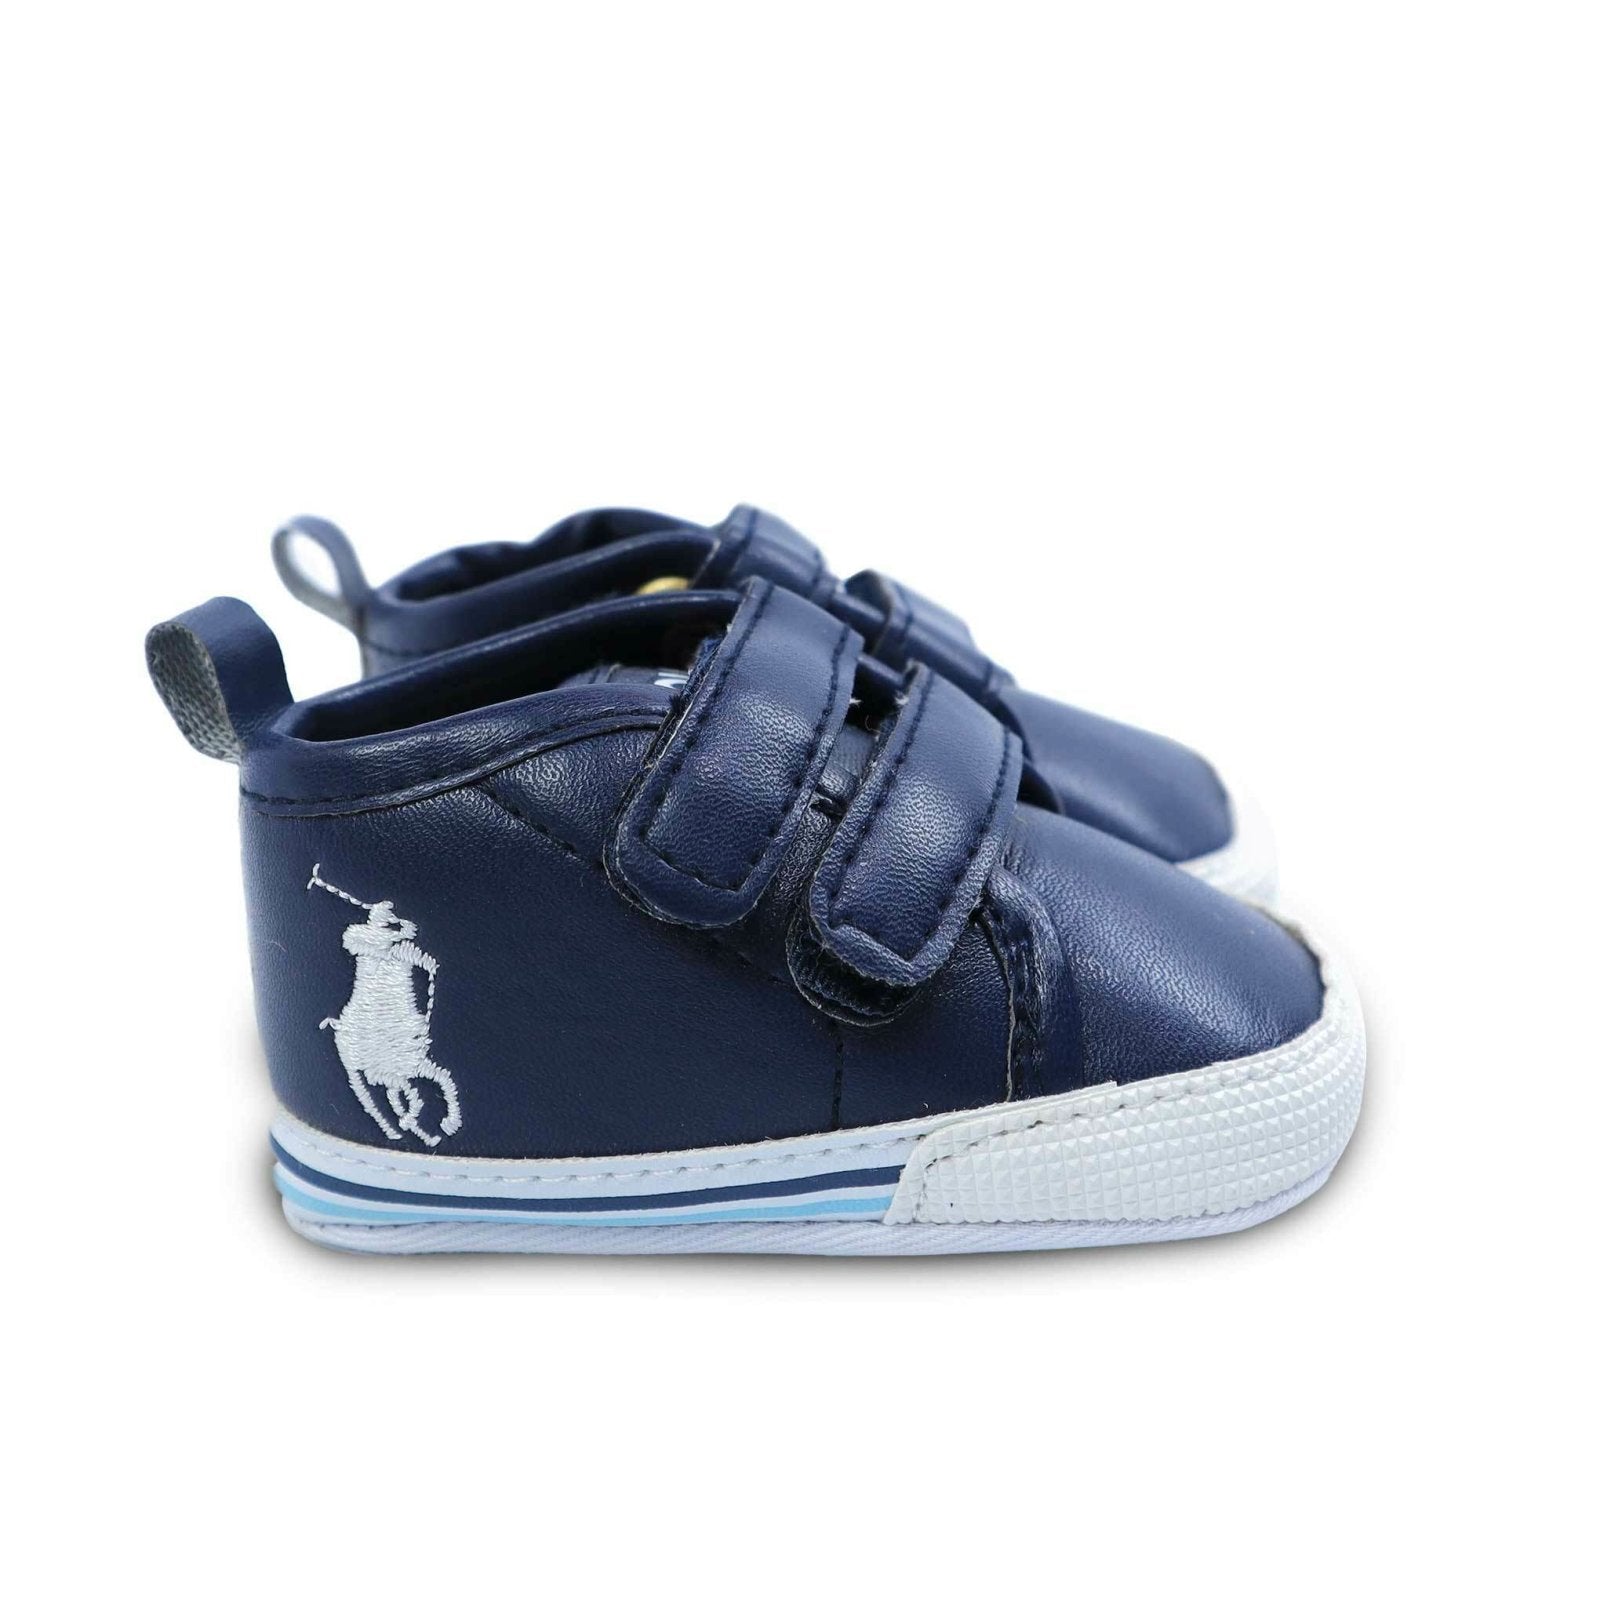 Baby Navy Blue Shoes by Little Darling